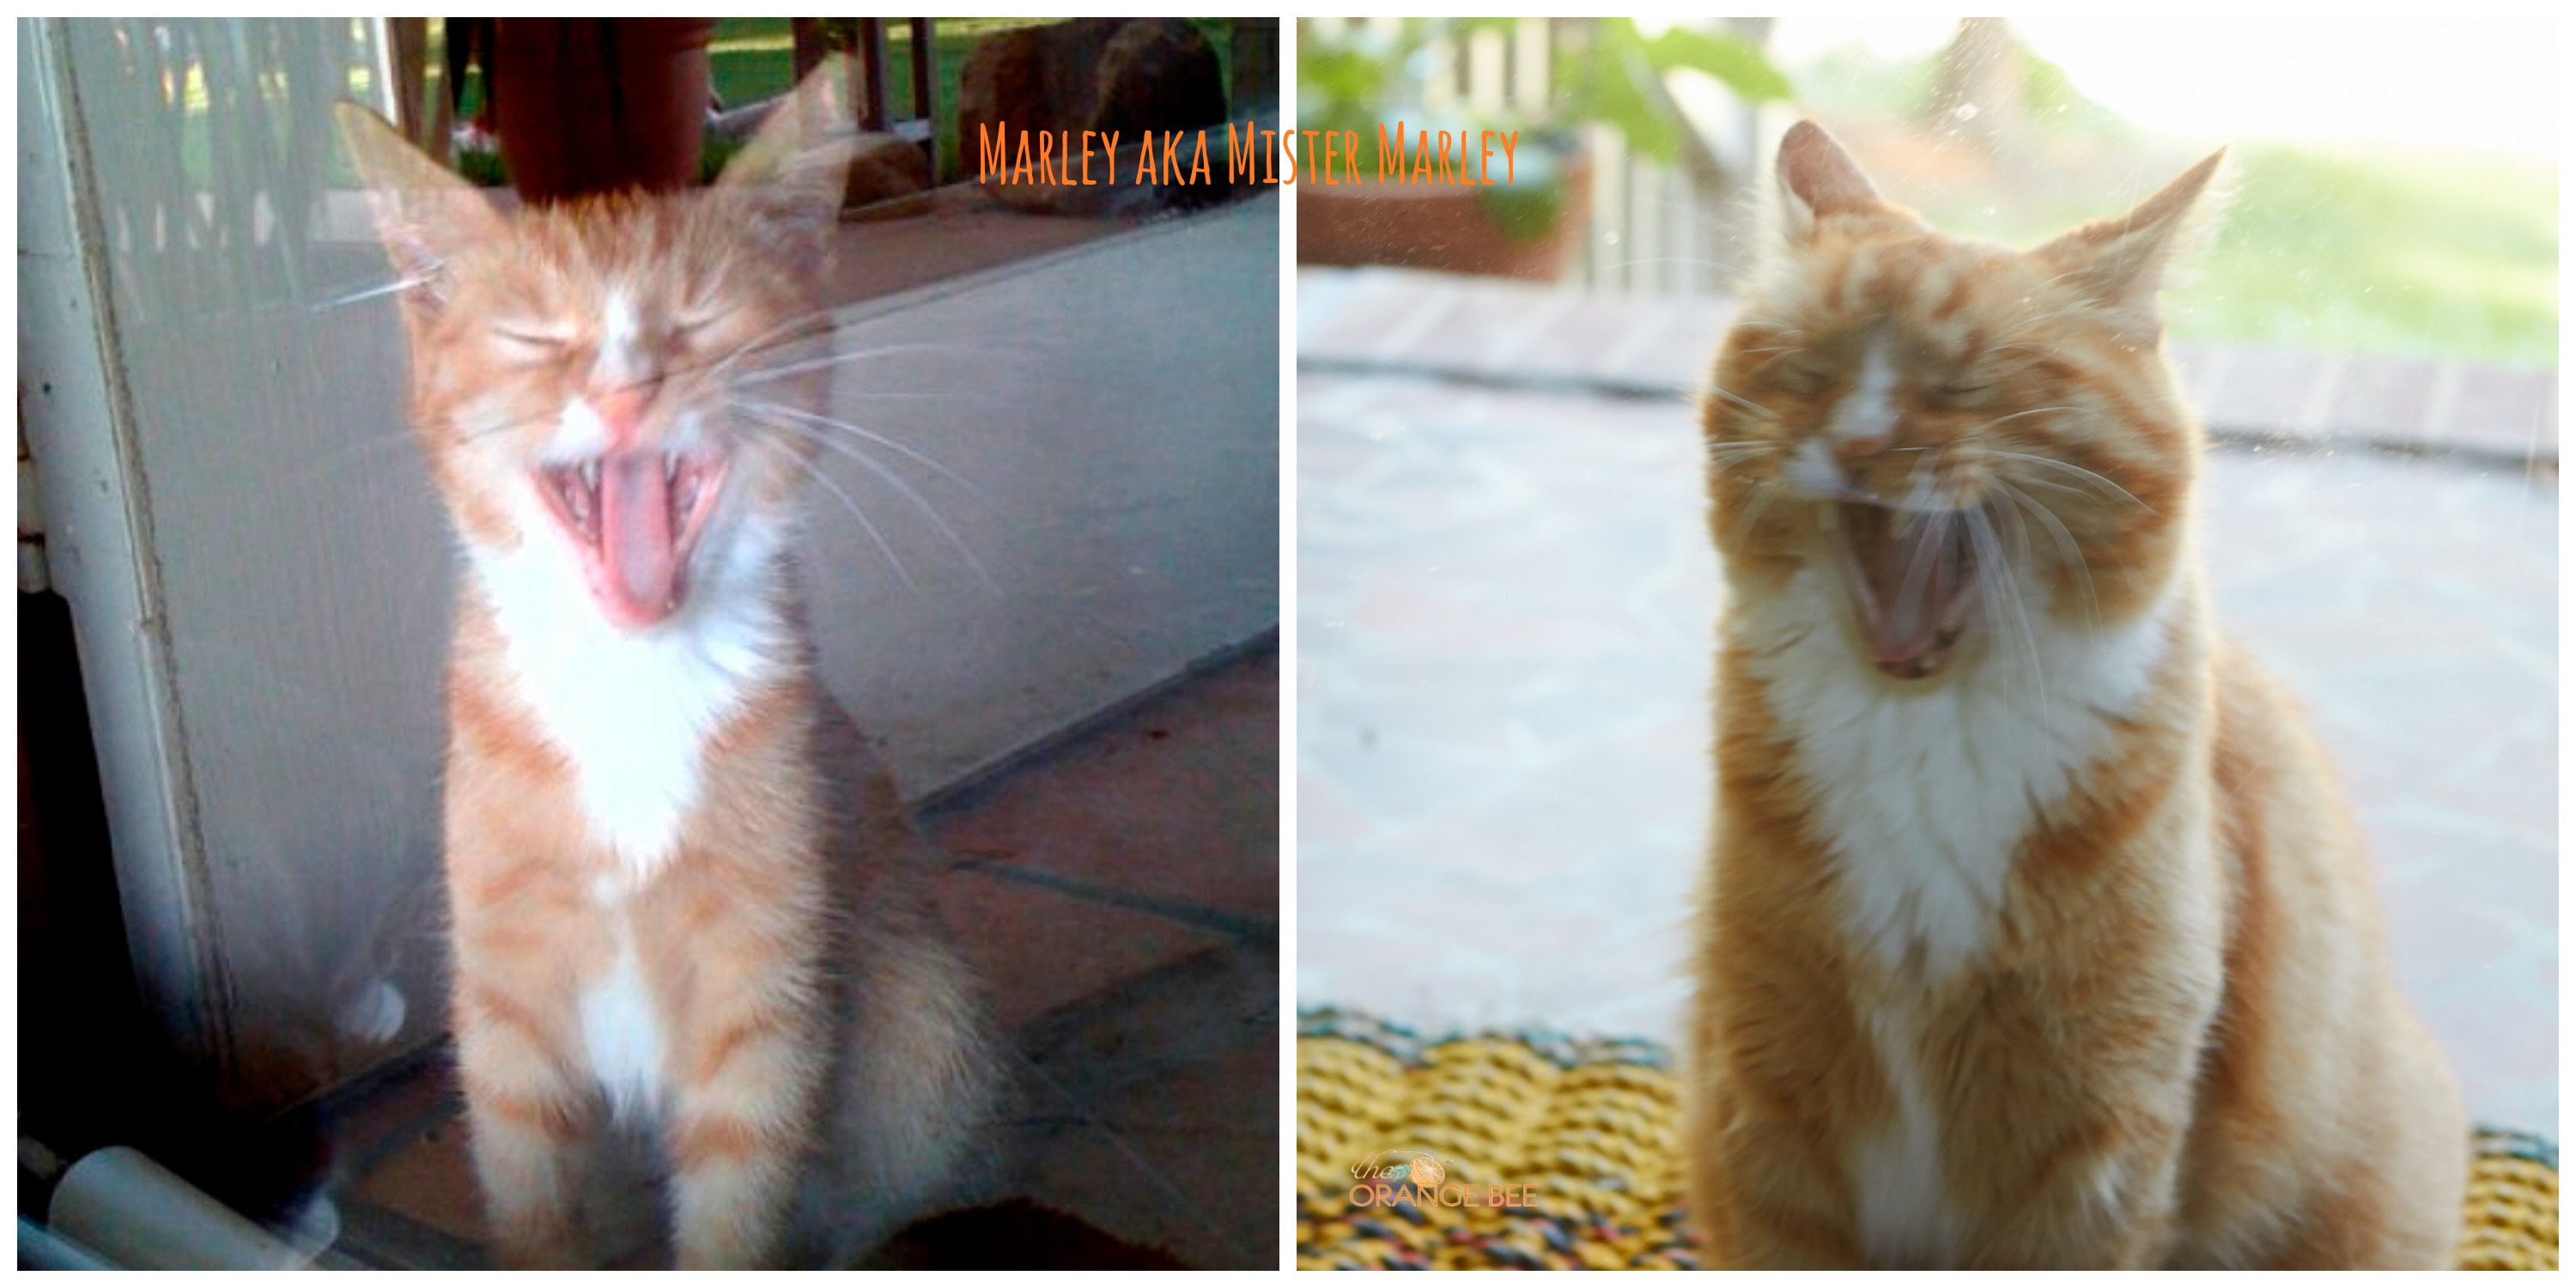 Marley as a kitten and now - he's hasn't changed much!